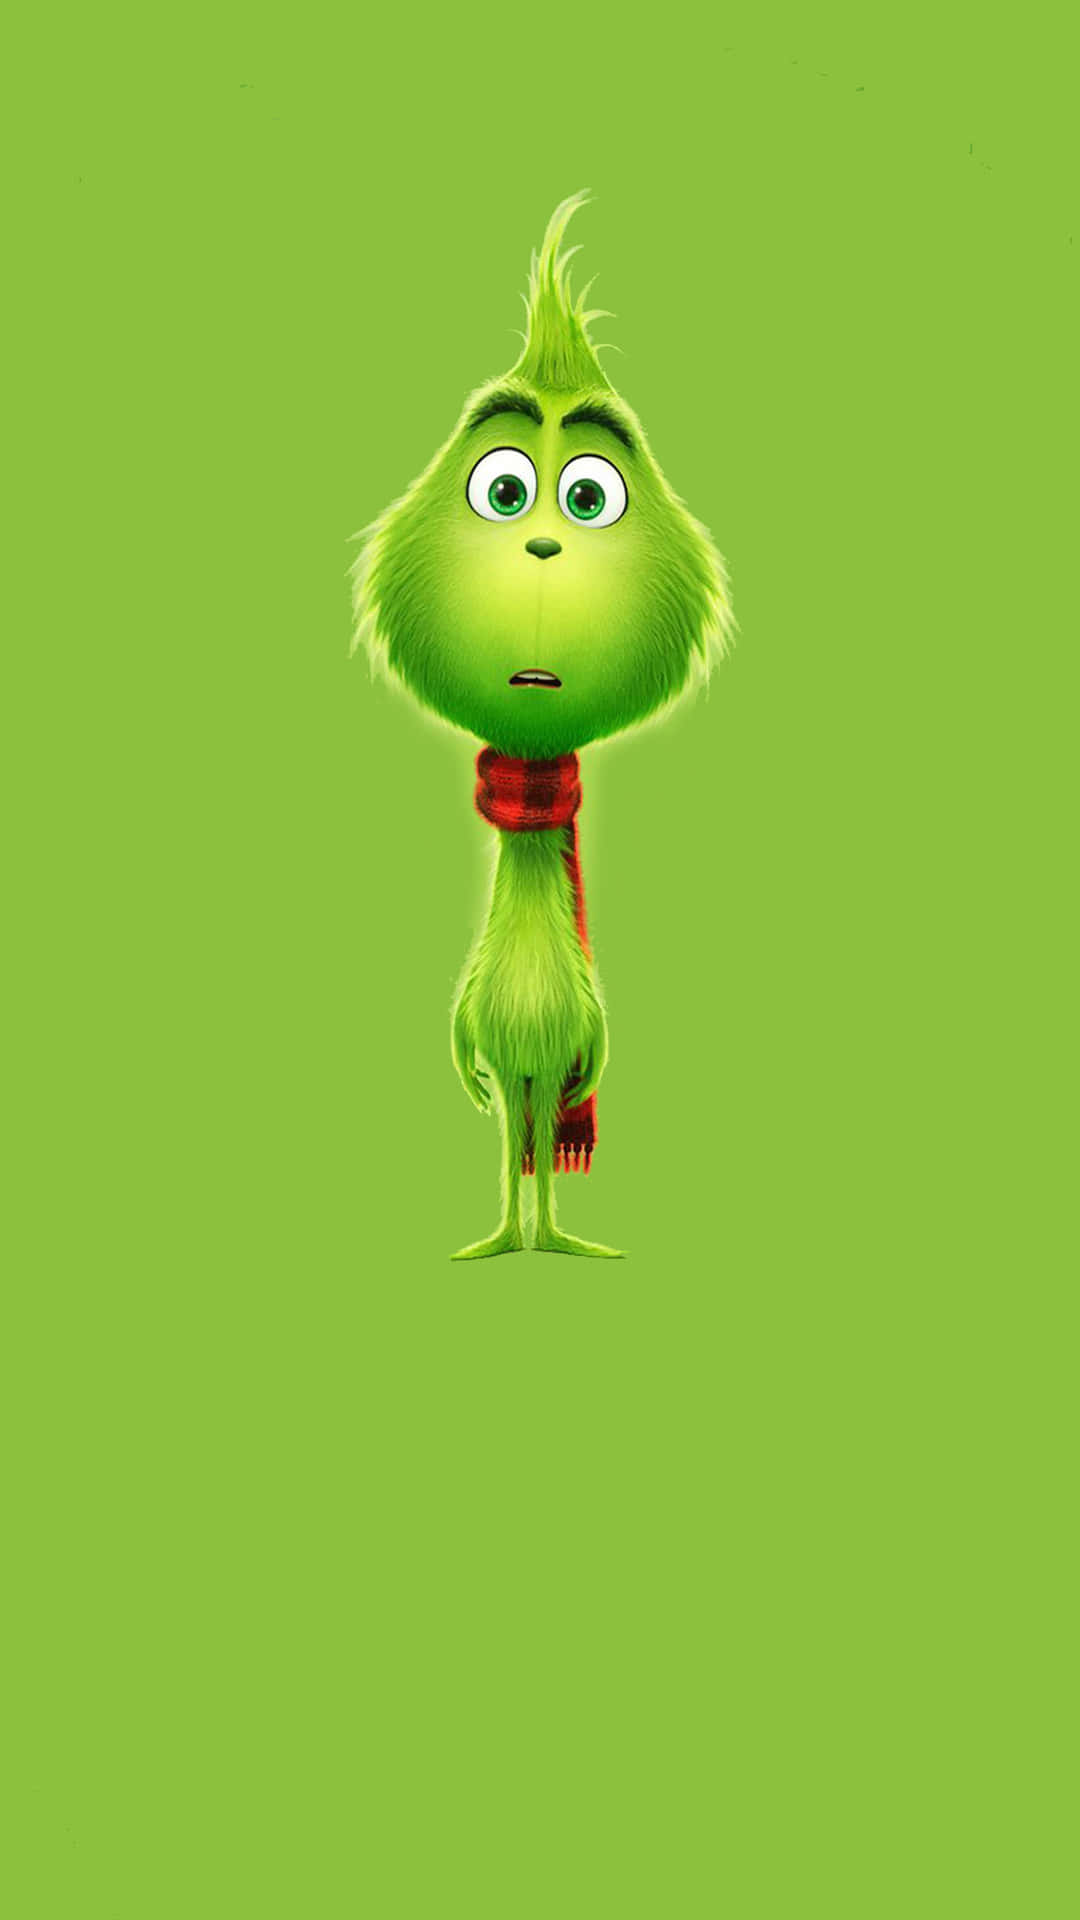 Young Grinch Standing Green Background Wallpaper